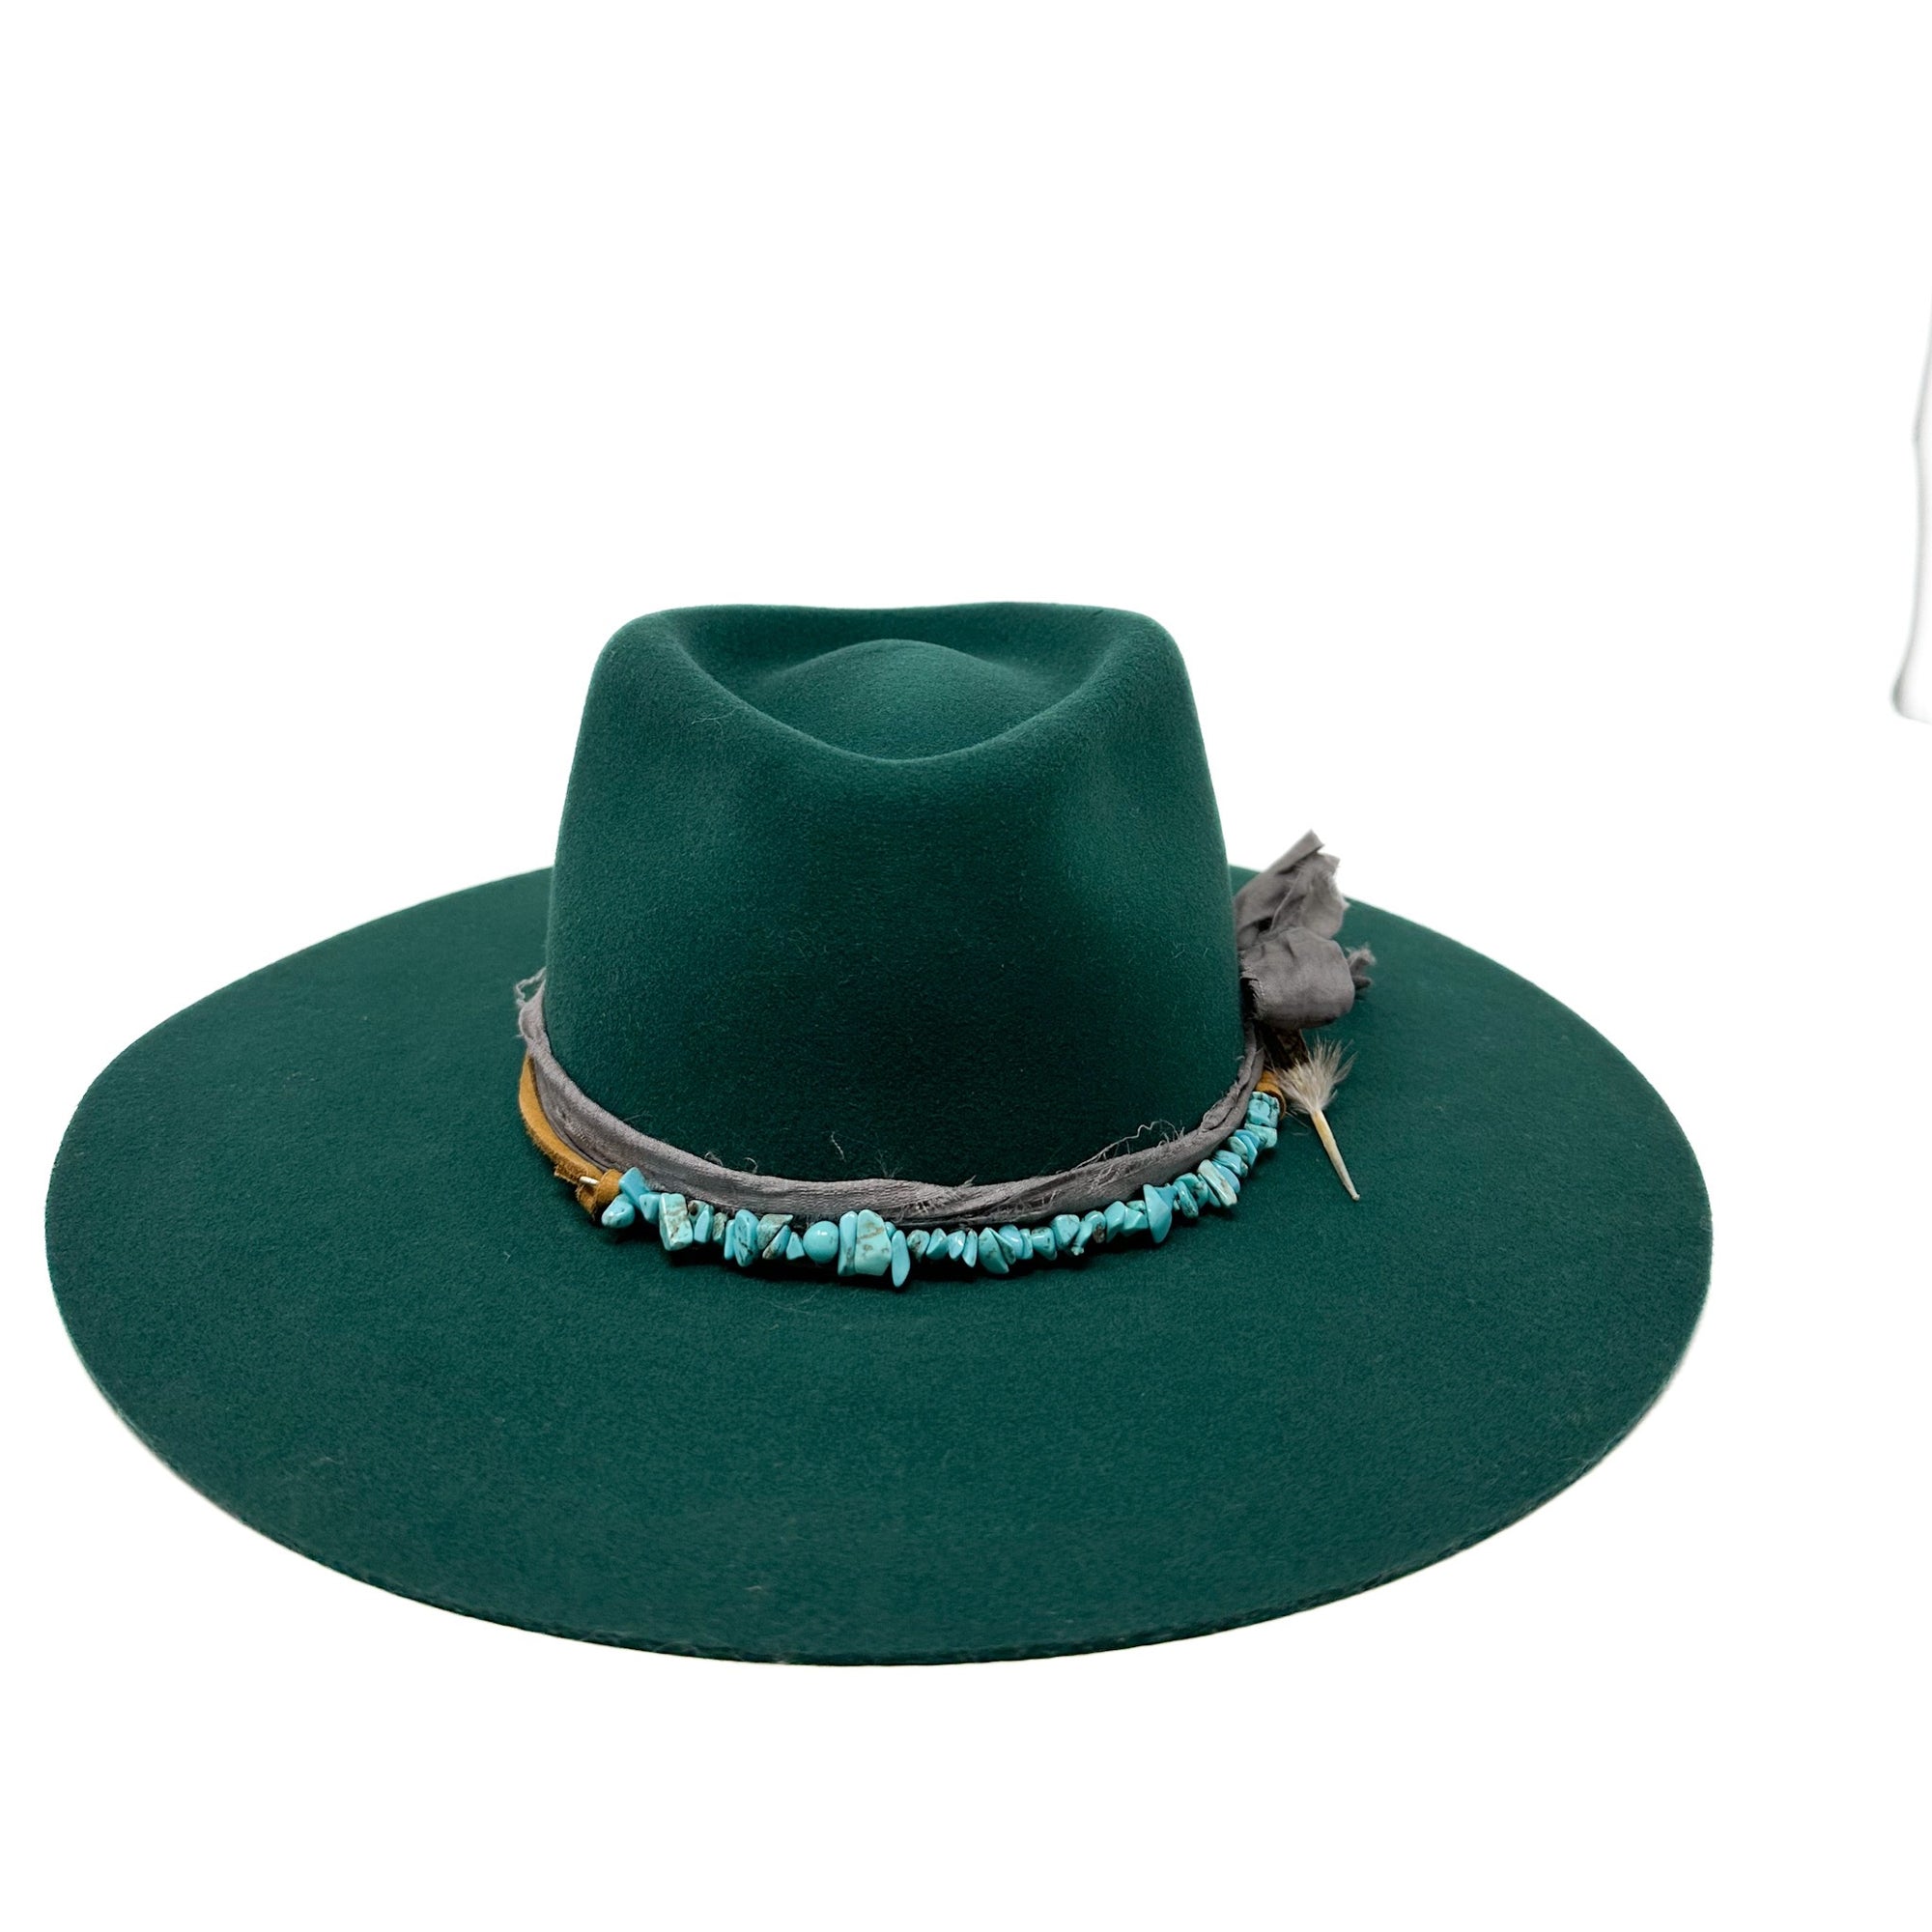 Montana fedora emerald green with removable turquoise hat band